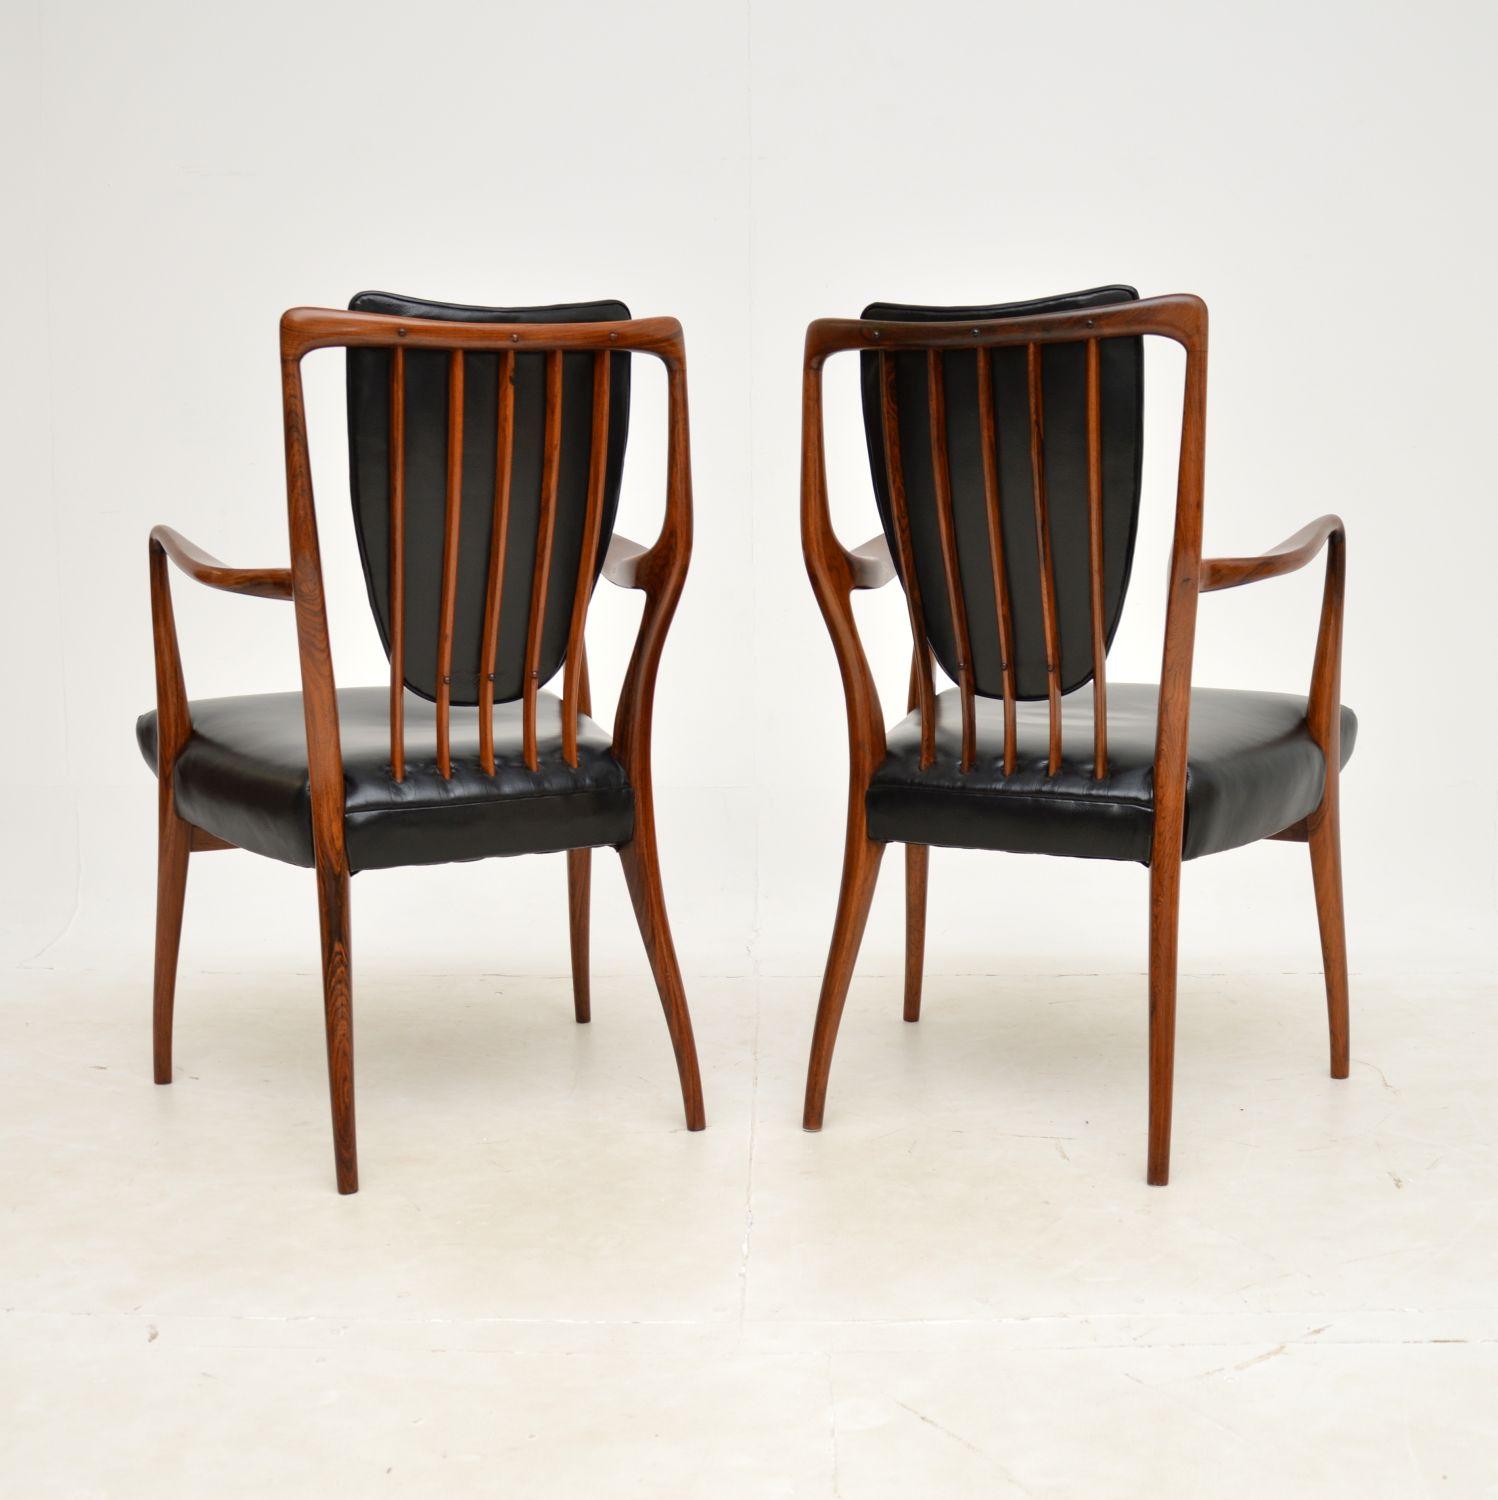 British 1950s Pair of Carver Armchairs by Andrew Milne For Sale